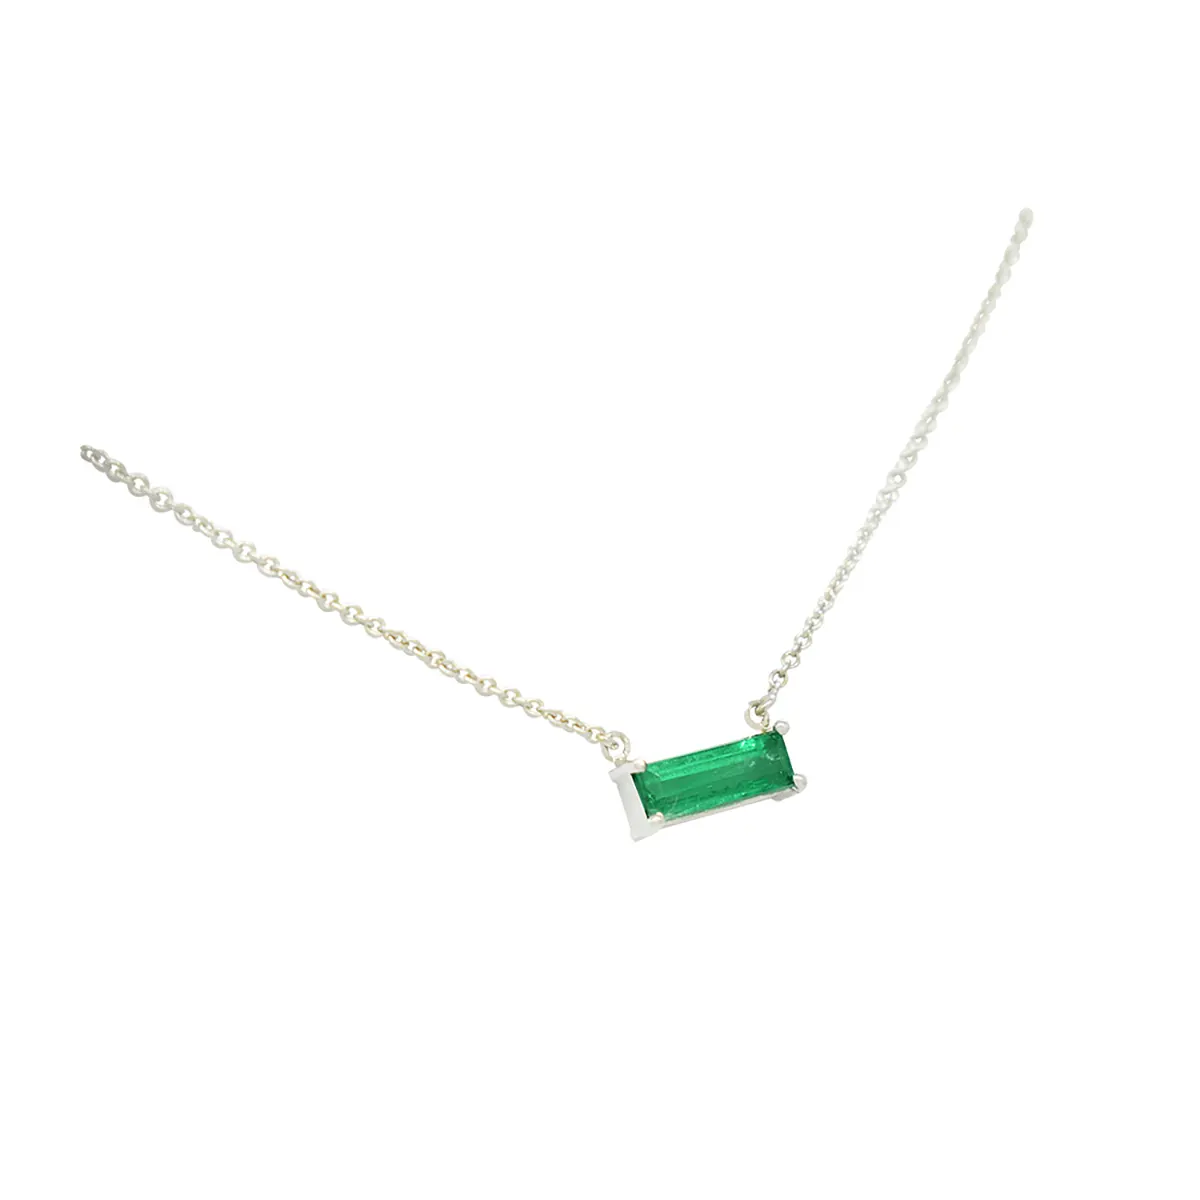 18K White Gold Solitaire Emerald Necklace with Baguette Cut Natural Colombian Emerald